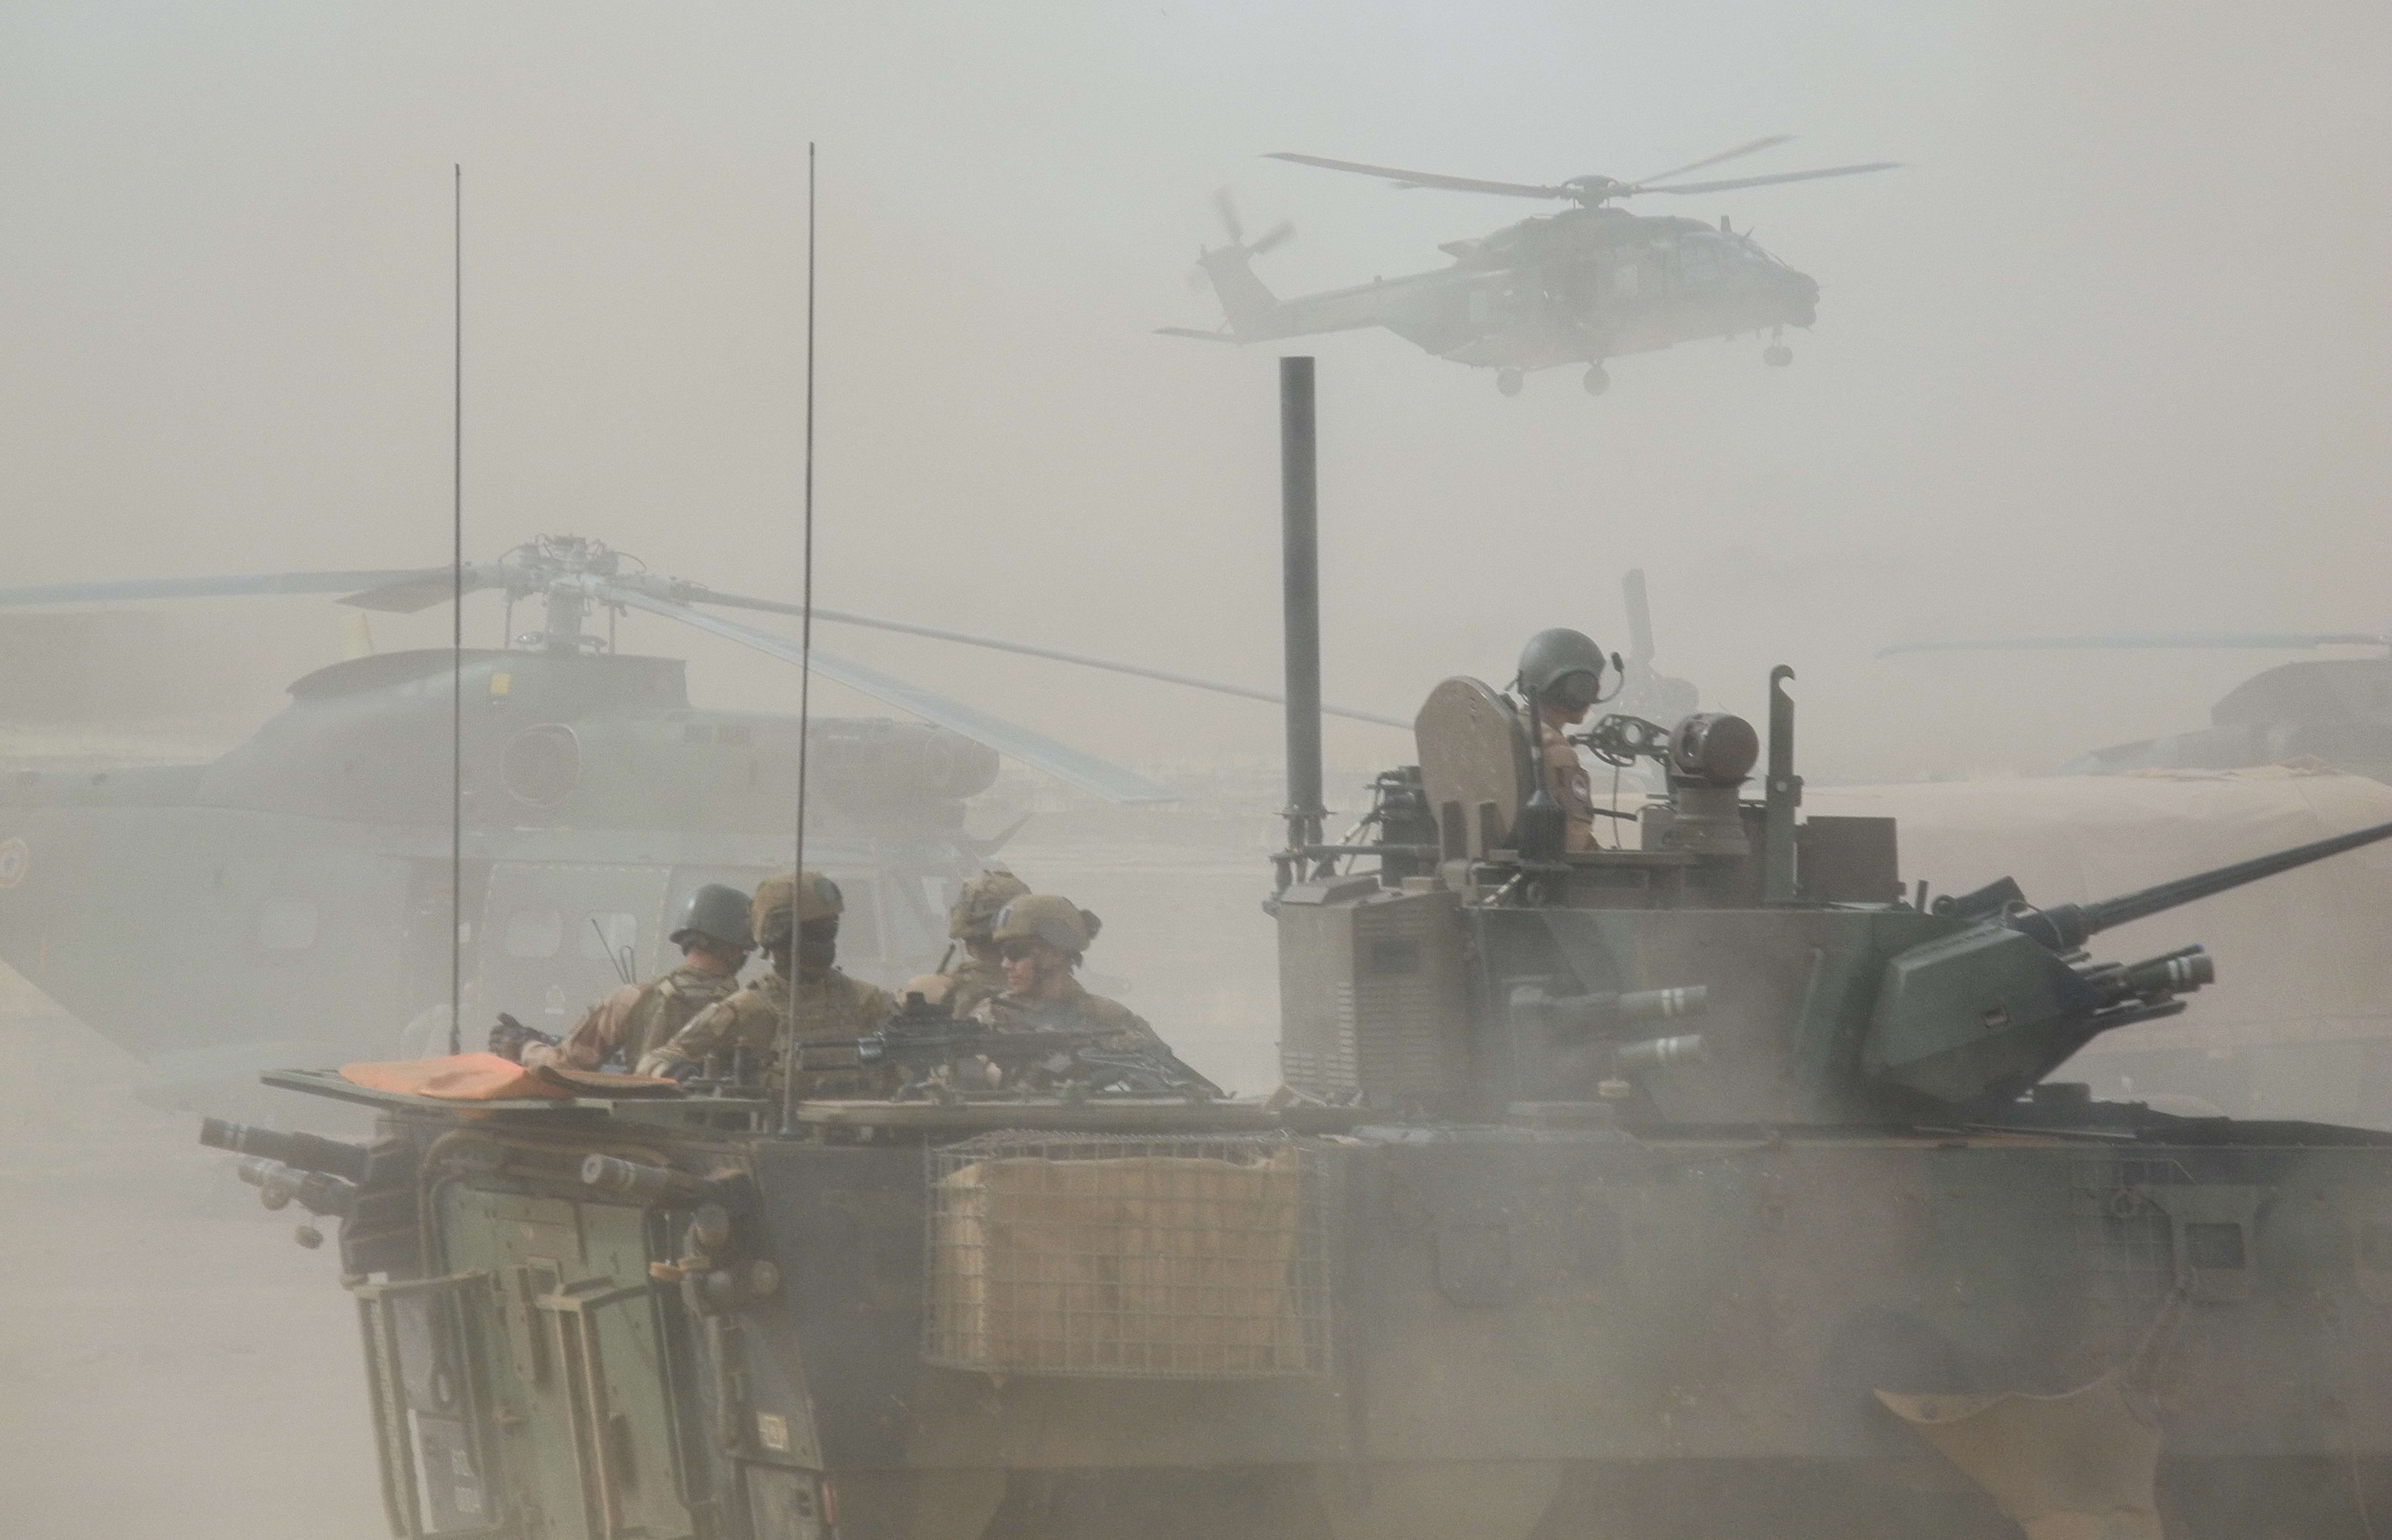 File photo taken on March 27, 2019 shows a French armoured vehicle driving by helicopters during the start of the French Barkhane Force operation in Mali's Gourma region.